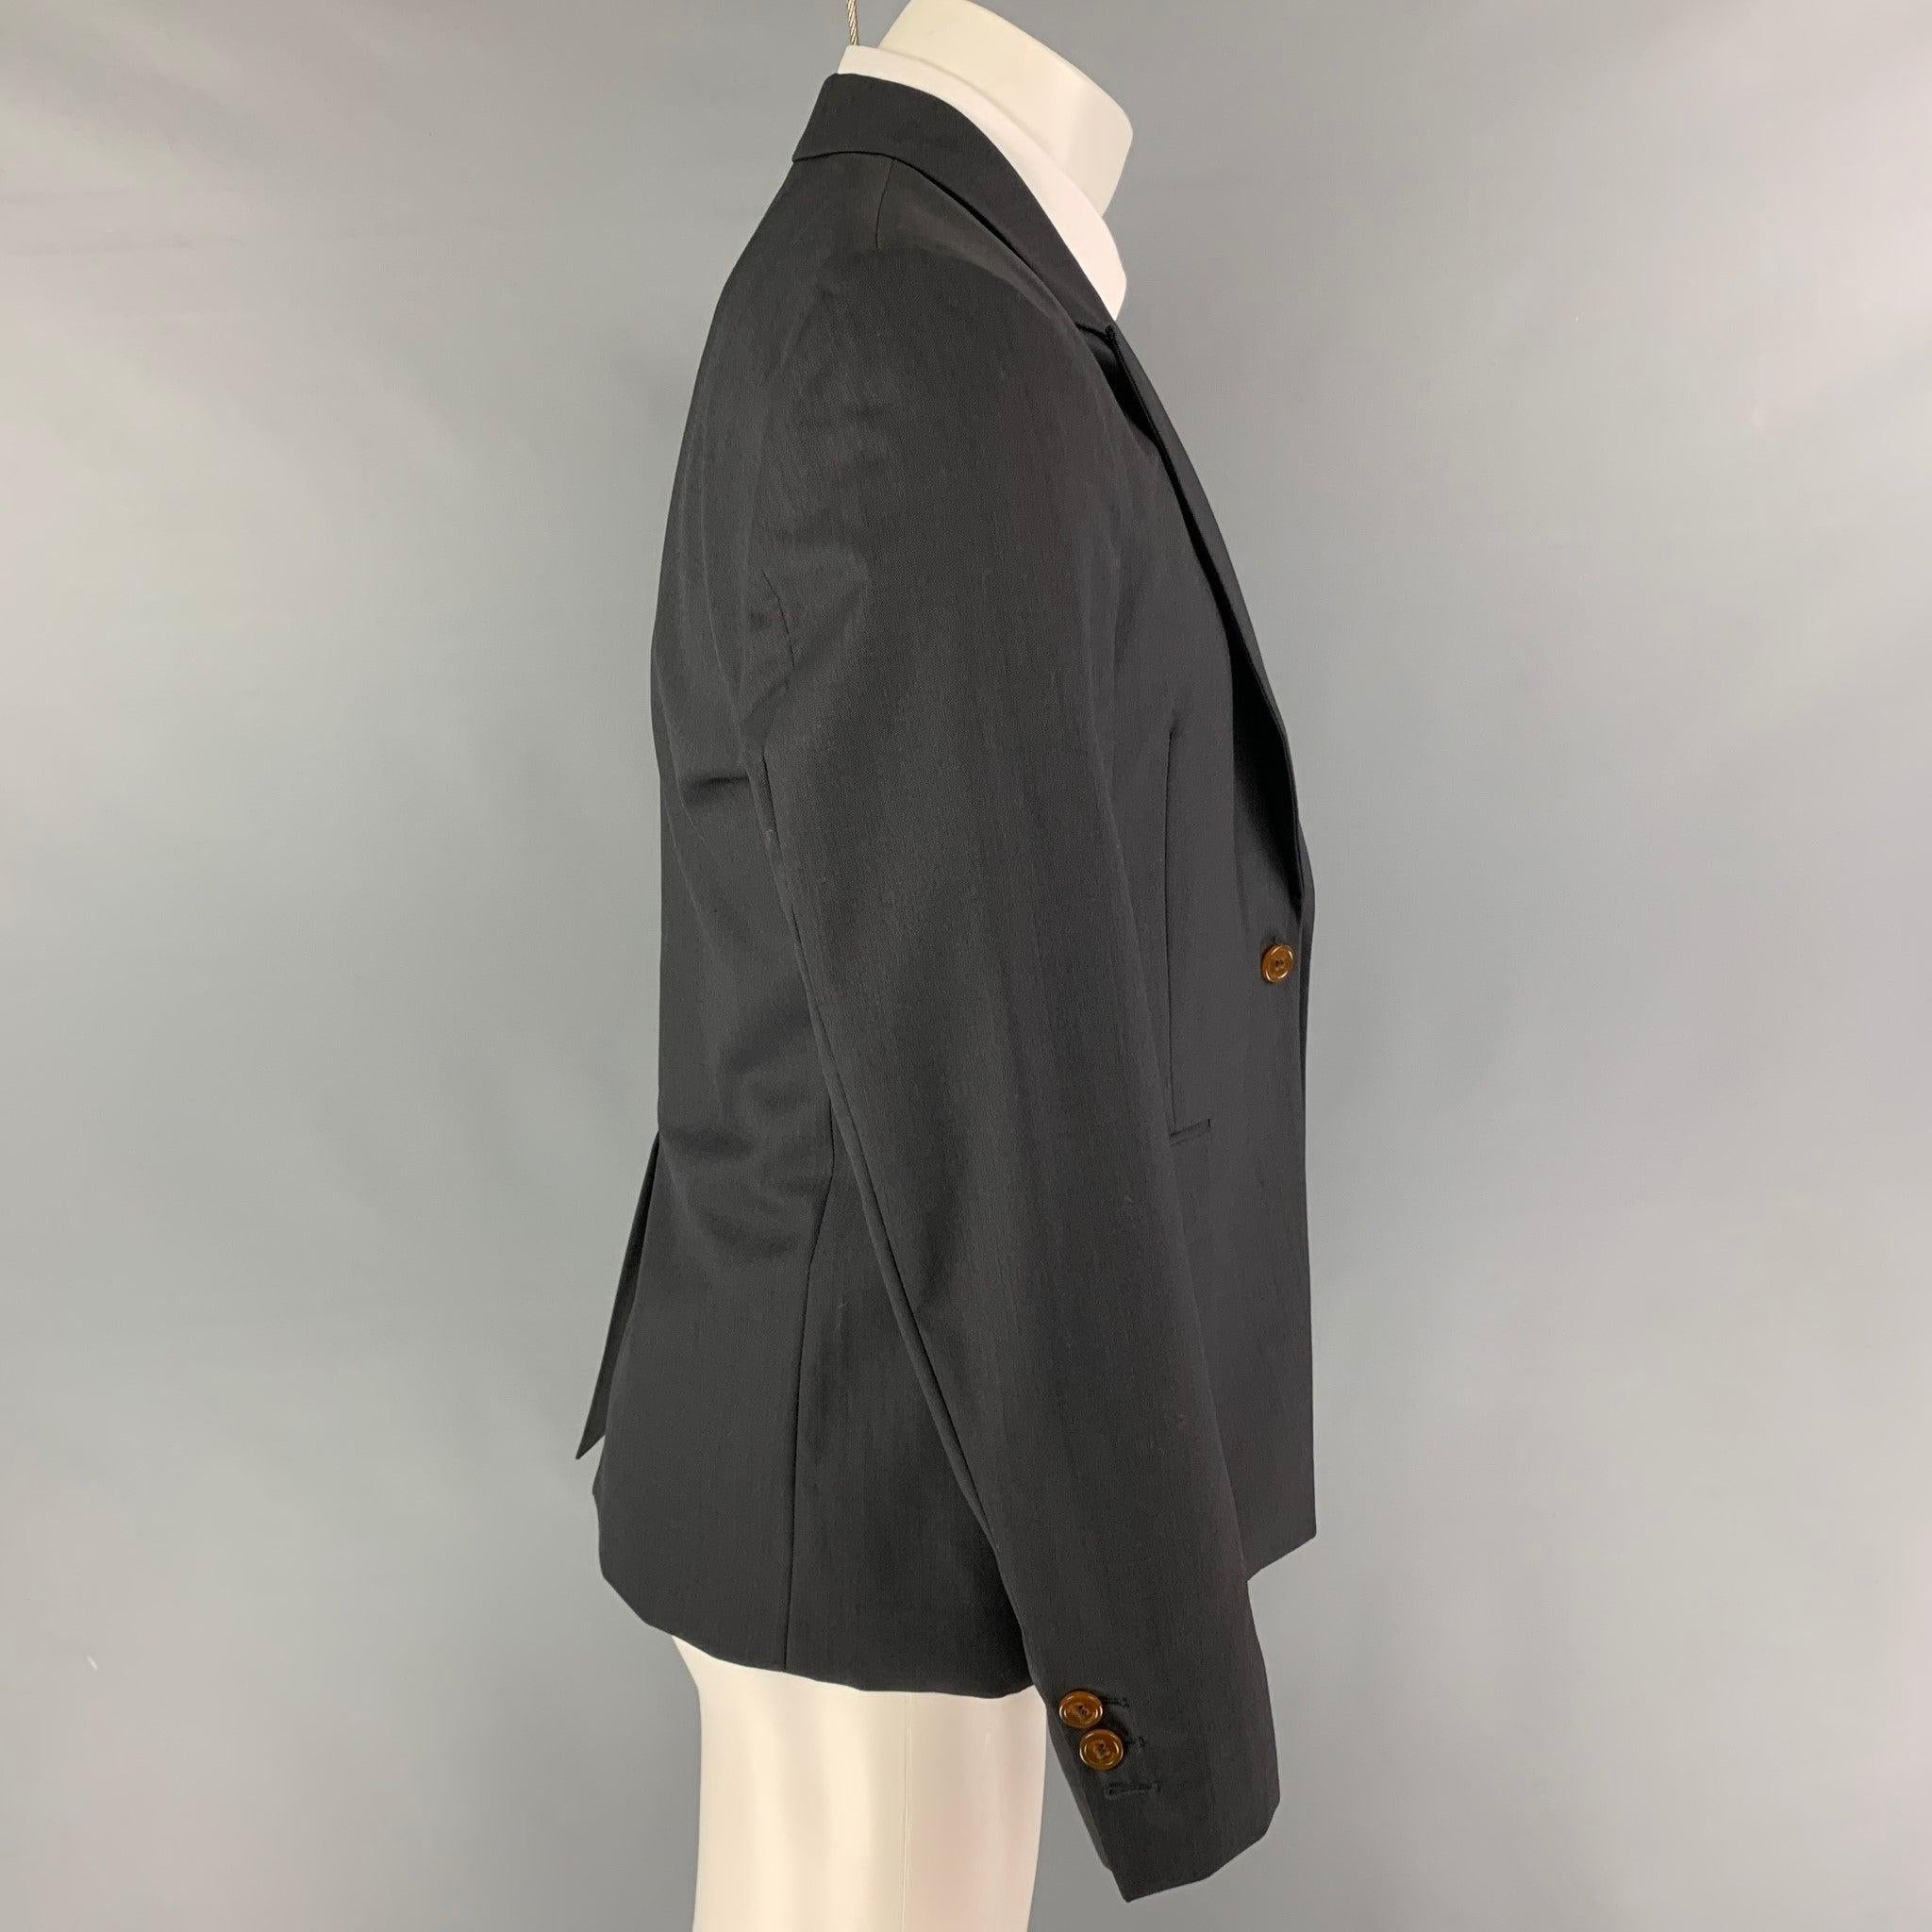 VIVIENNE WESTWOOD MAN Size 40 Charcoal Wool Peak Lapel Sport Coat In Good Condition For Sale In San Francisco, CA